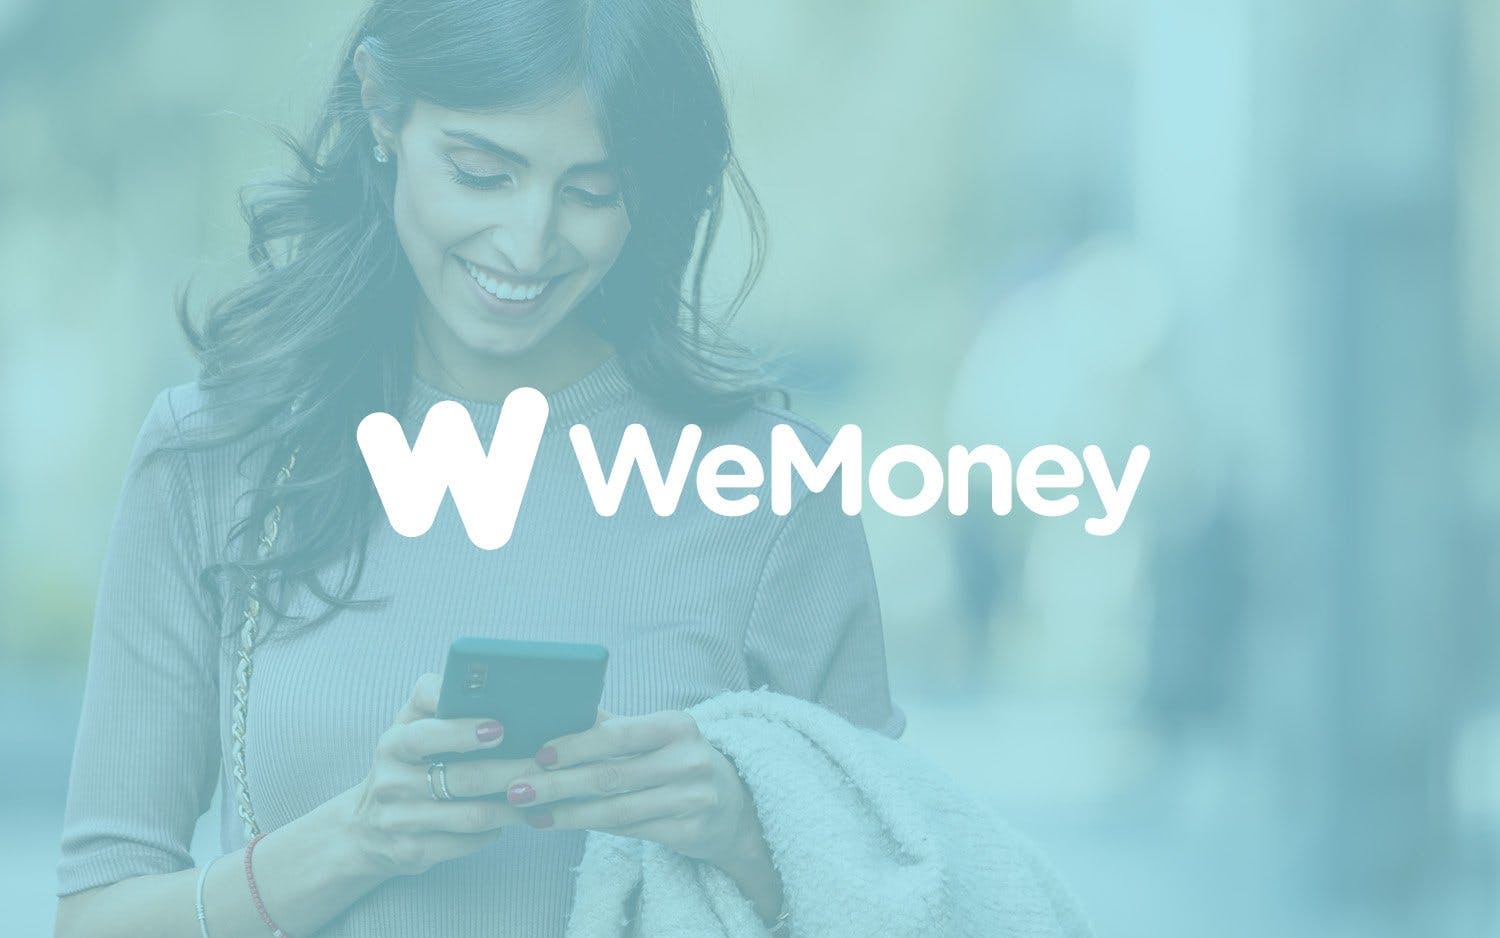 How WeMoney lowered acquisition costs & increased retention